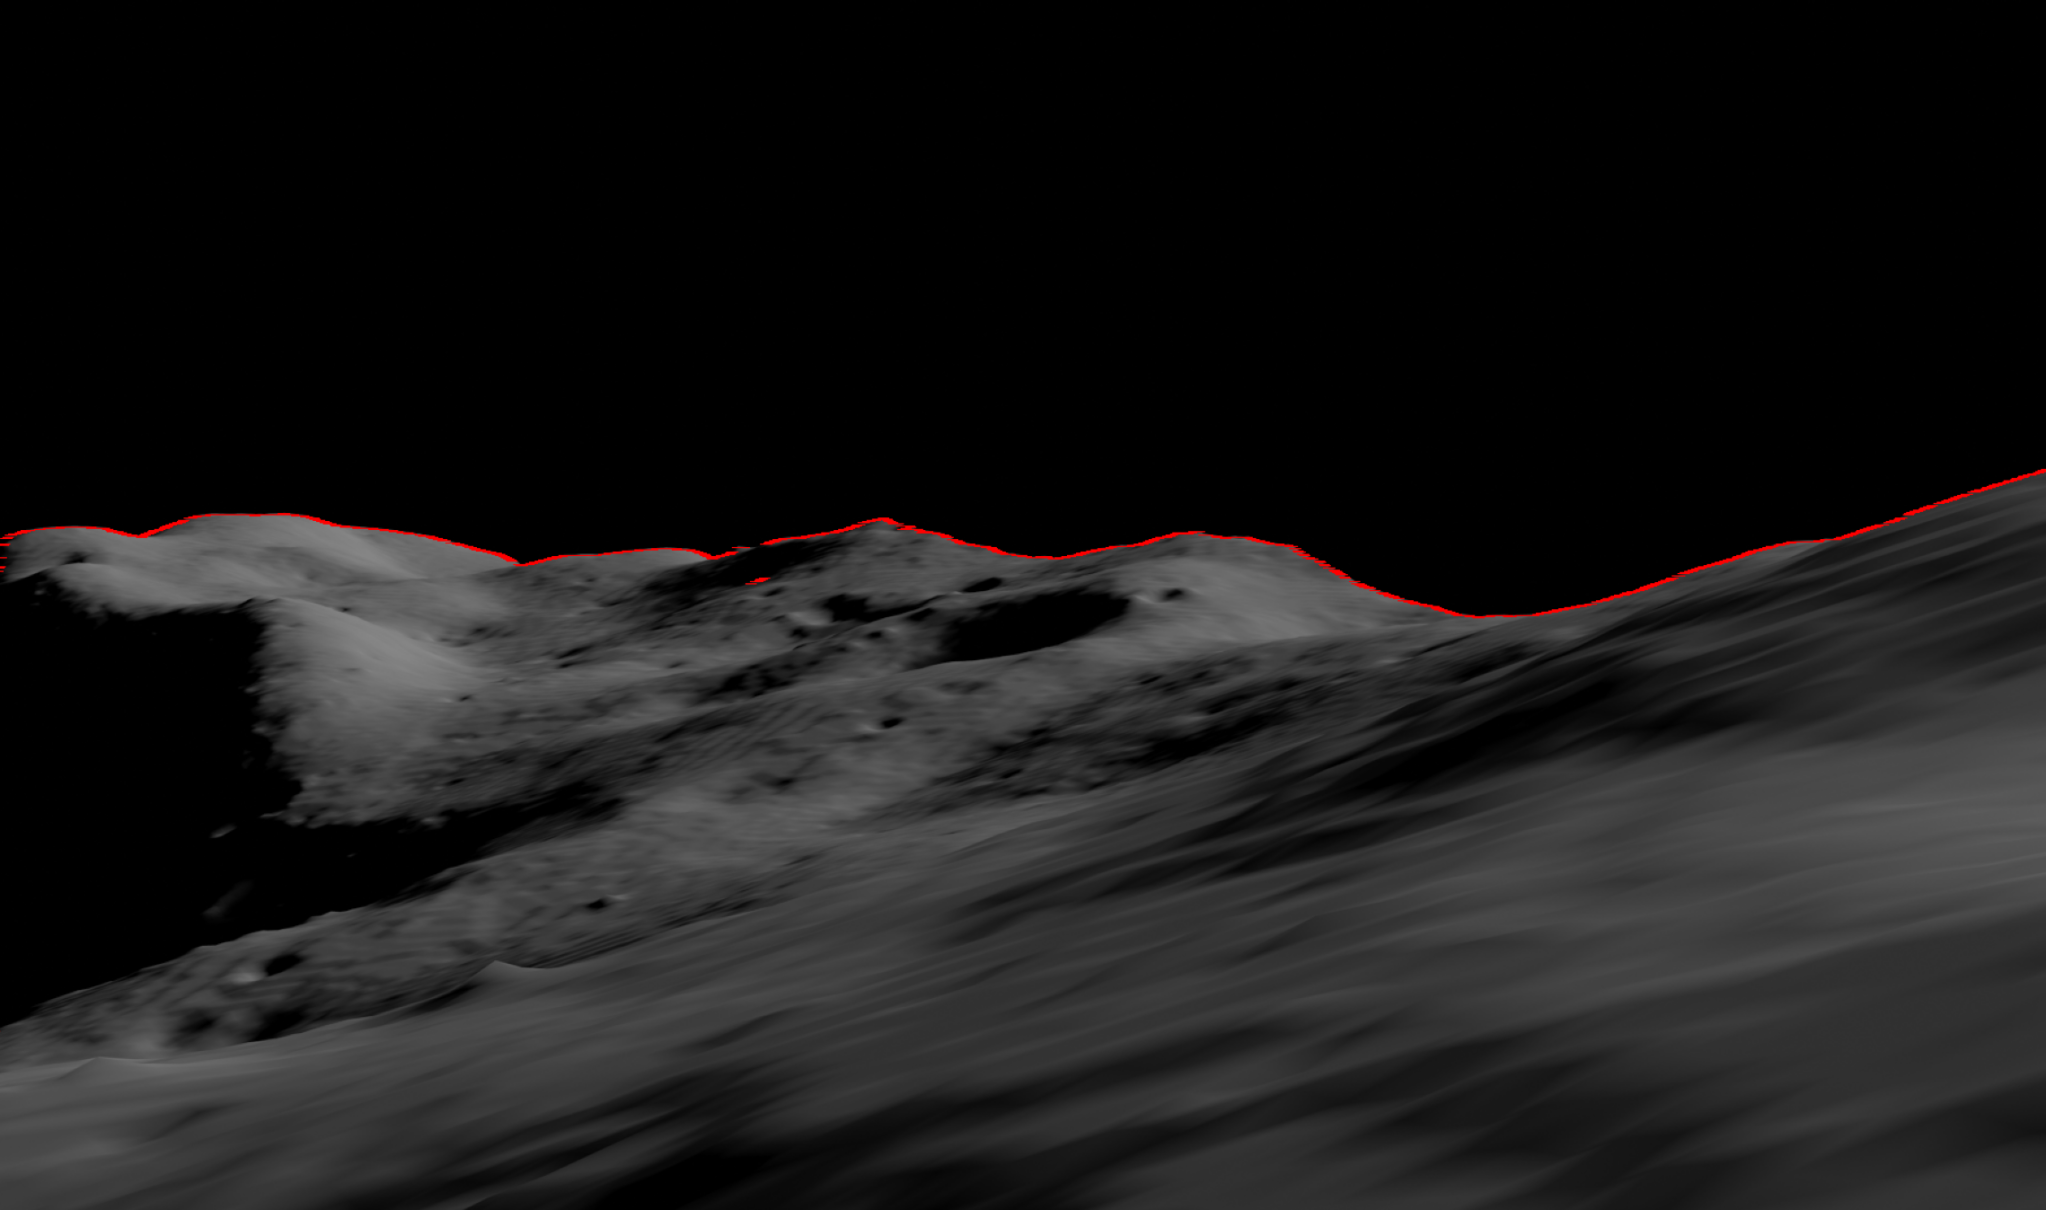 an AI draws a red horizon on a black and grey landscape under a black sky shows dimly-lit craters on the moon. red lines mark the boundary between land and sky